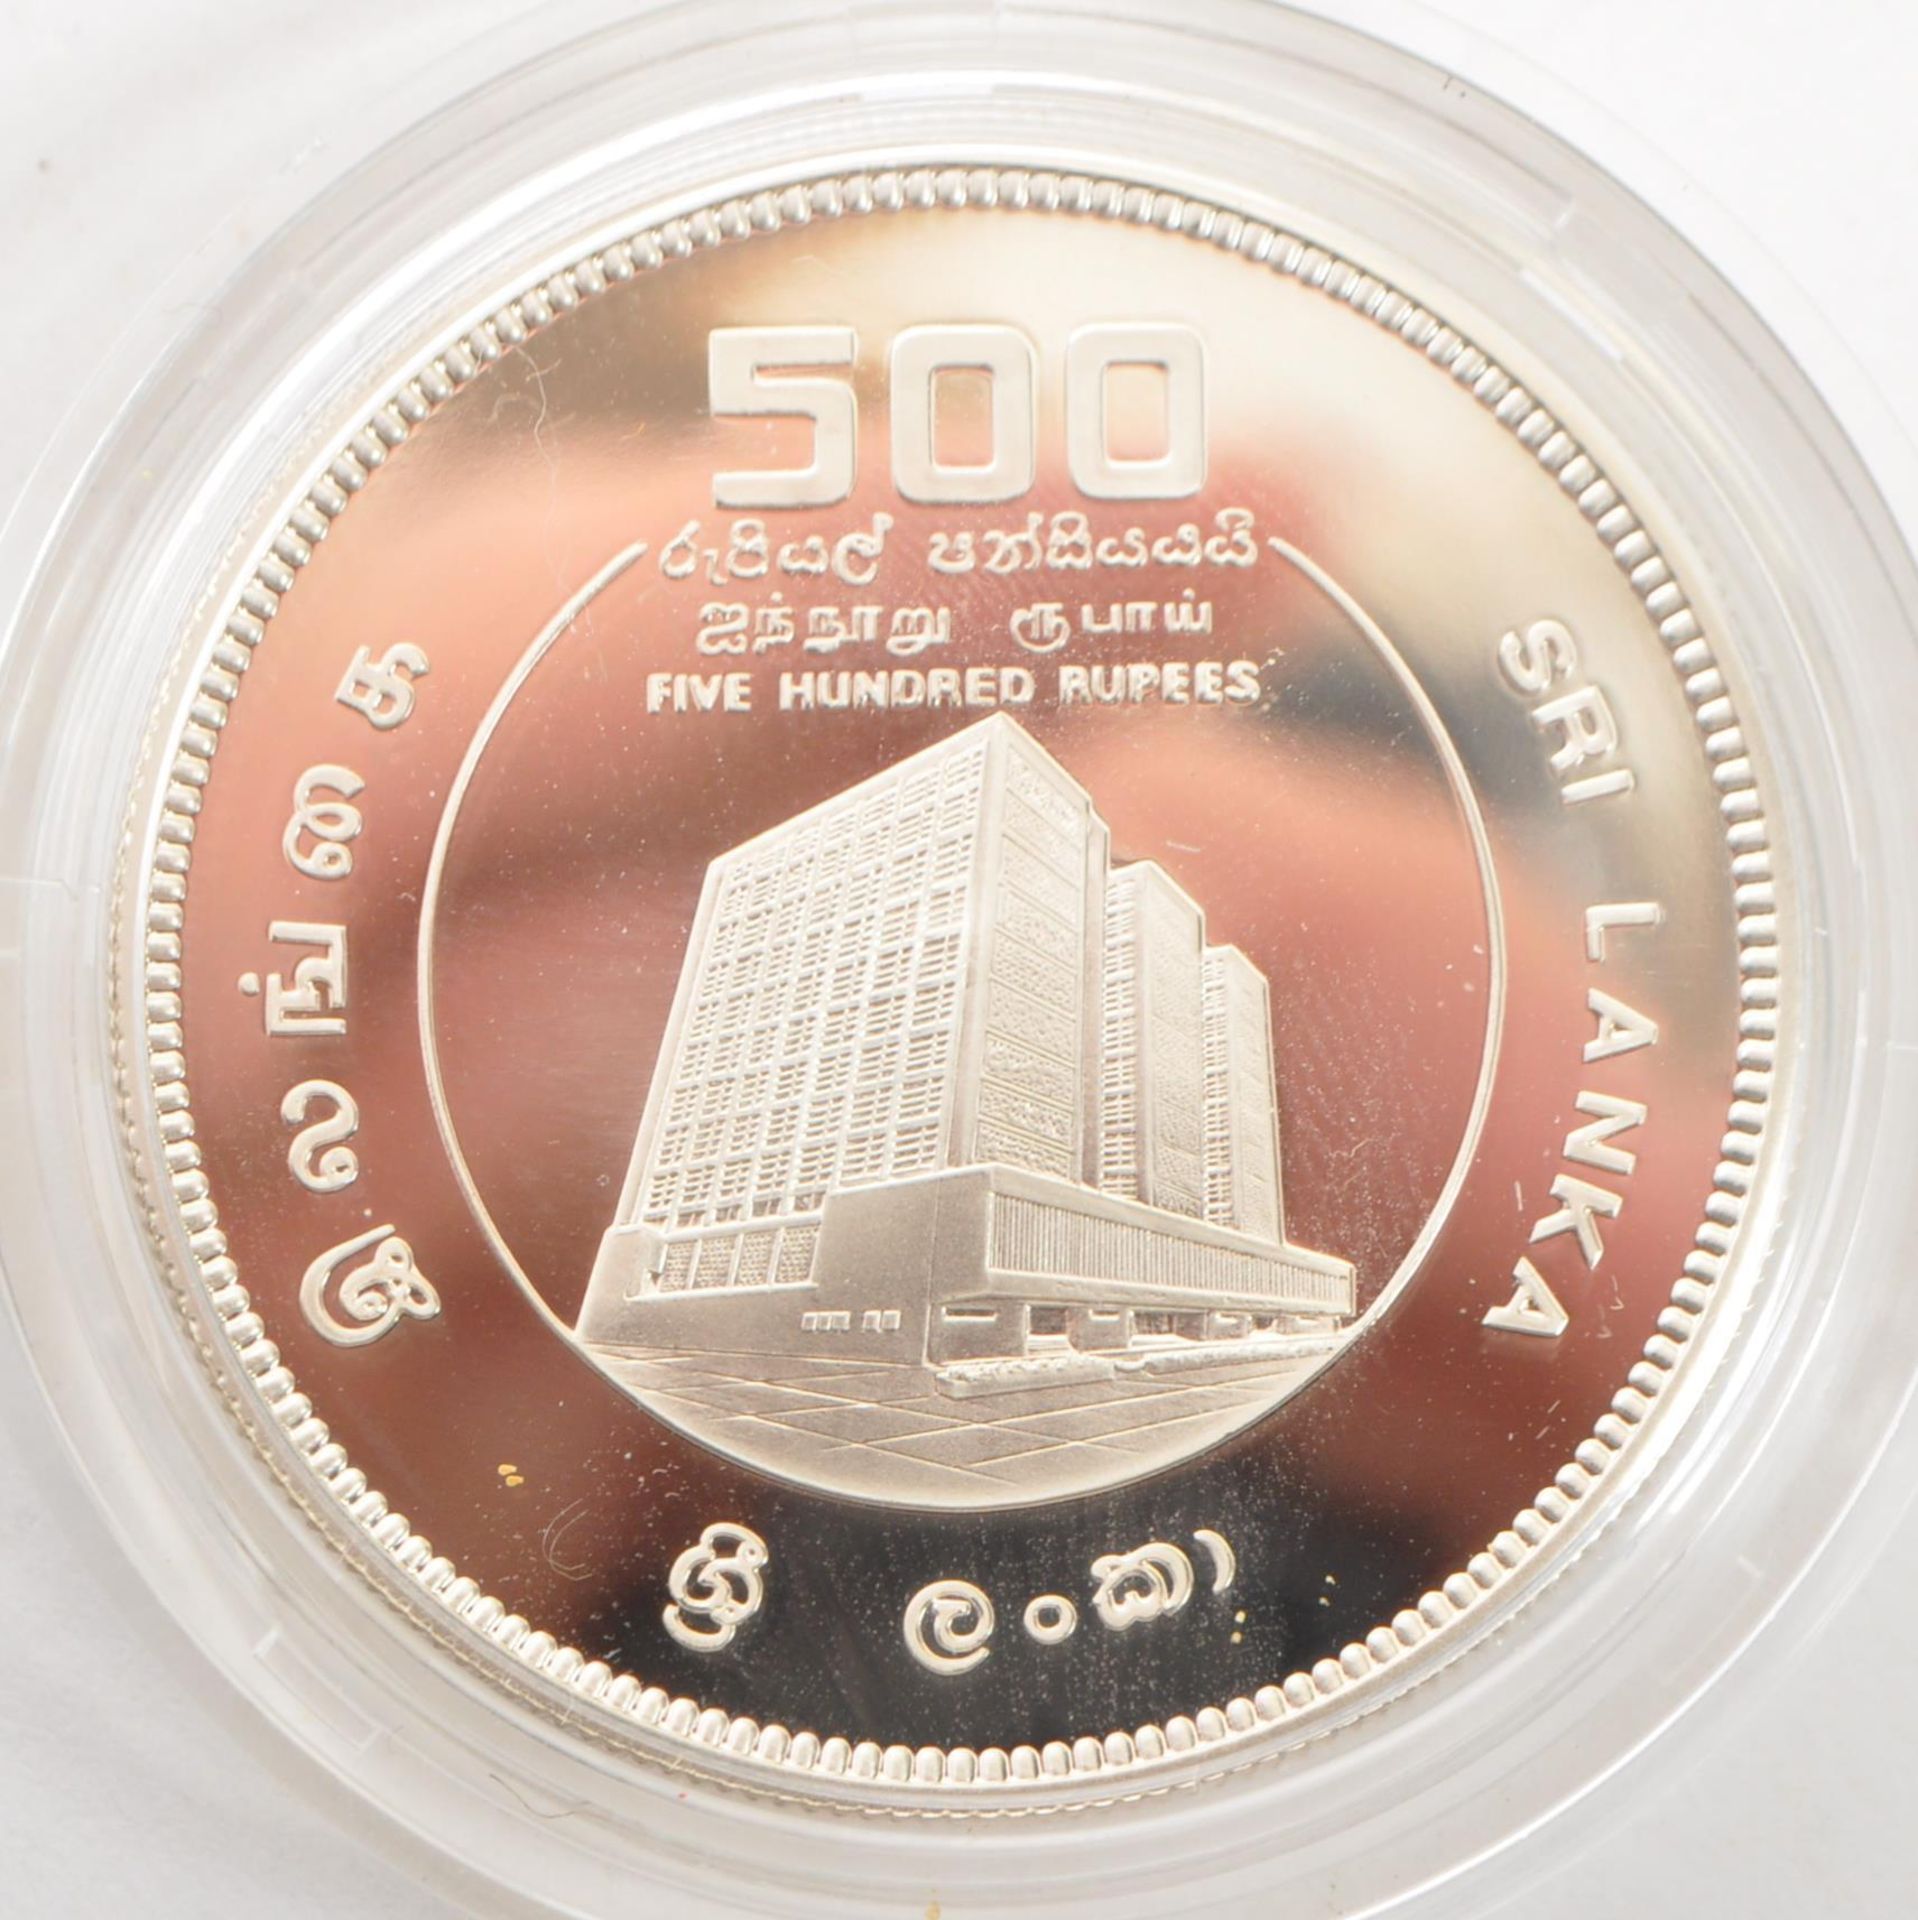 ROYAL MINT SILVER PROOF CROWN COIN - CENTRAL BANK OF SRI LANKA - Image 2 of 3